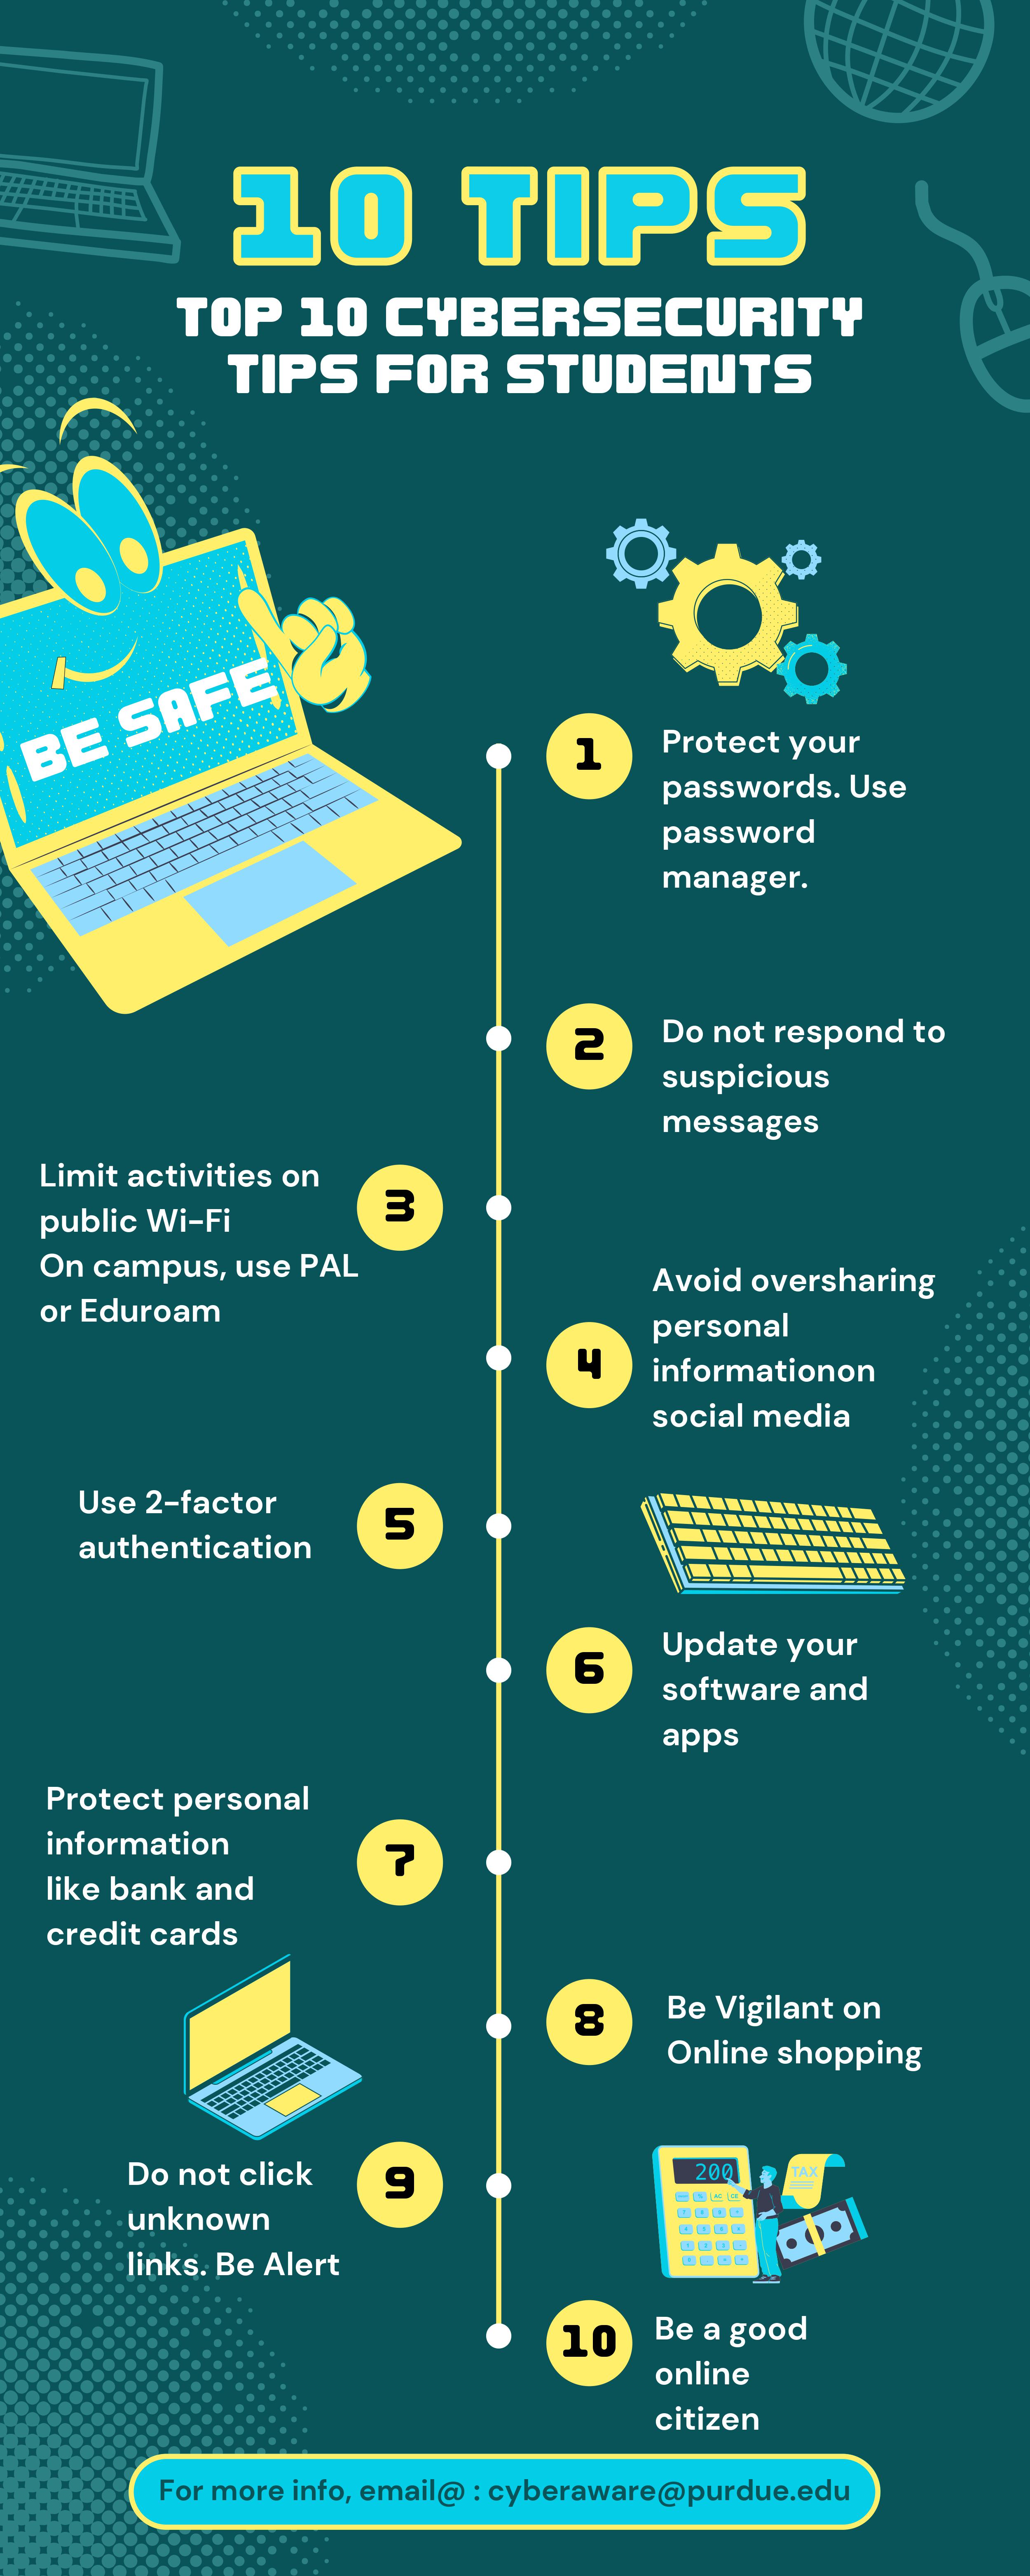 Top-10-Cybersecurity-Tips-for-Students.jpg